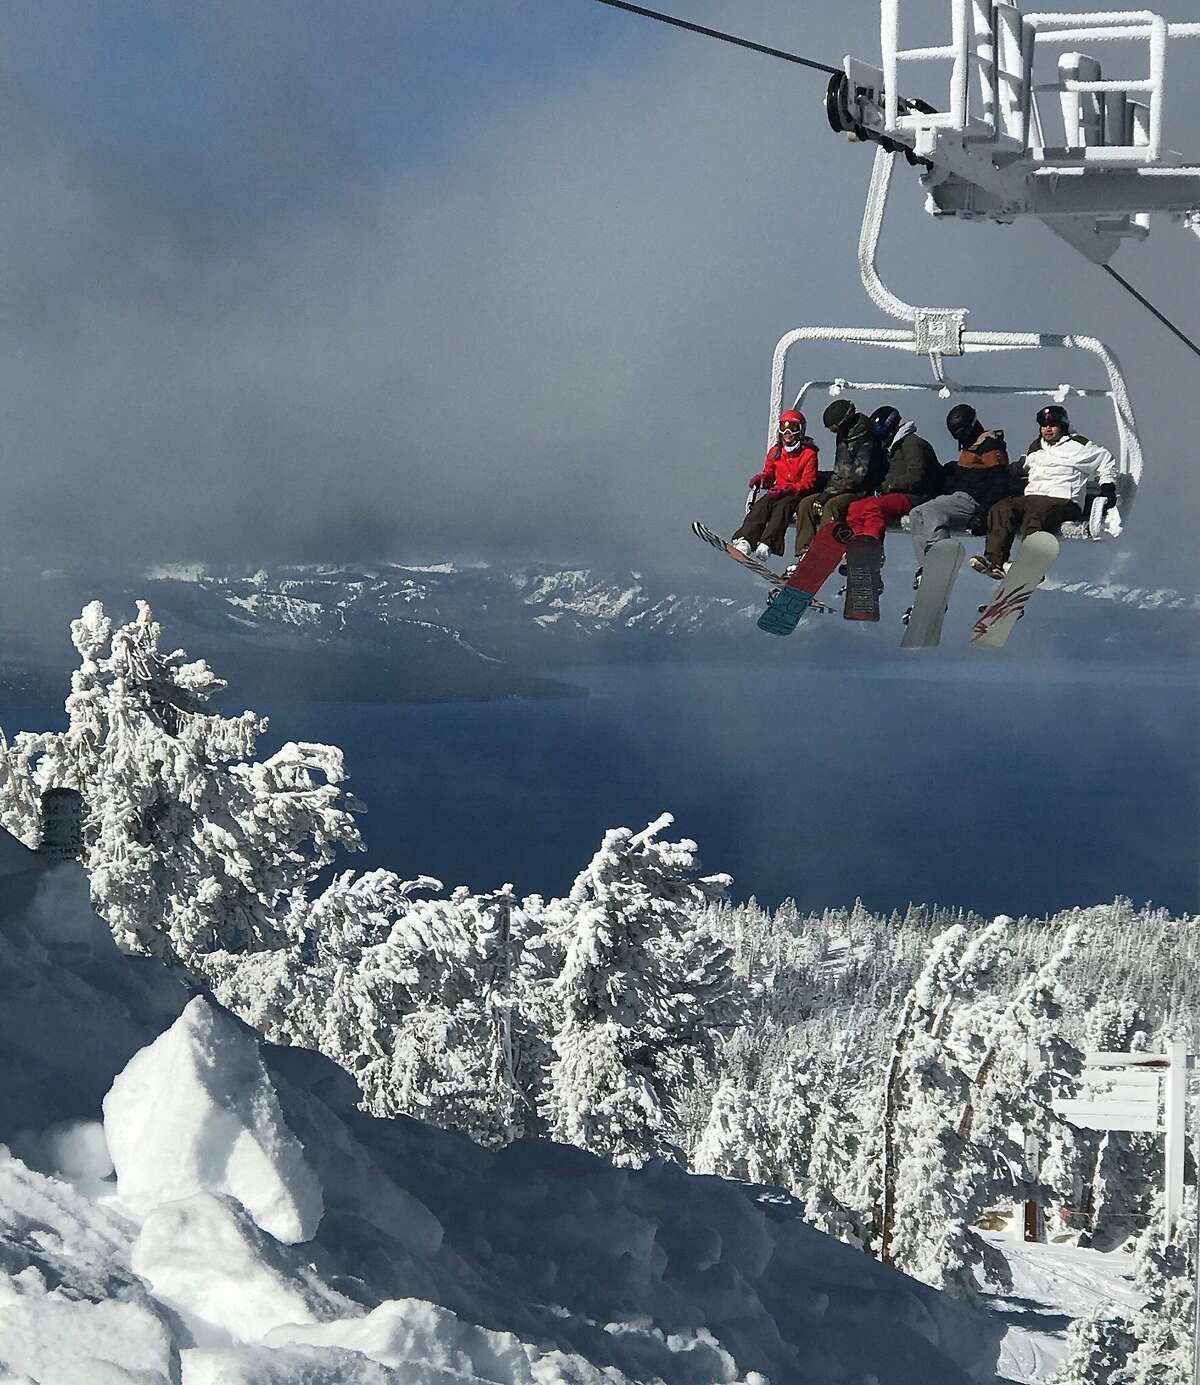 It was opening day for many Sierra ski resorts on Nov. 11, 2017. Skiers and snowboarders gathered at Heavenly in South Lake Tahoe to make their first turns on the fresh snow that had fallen the night before.